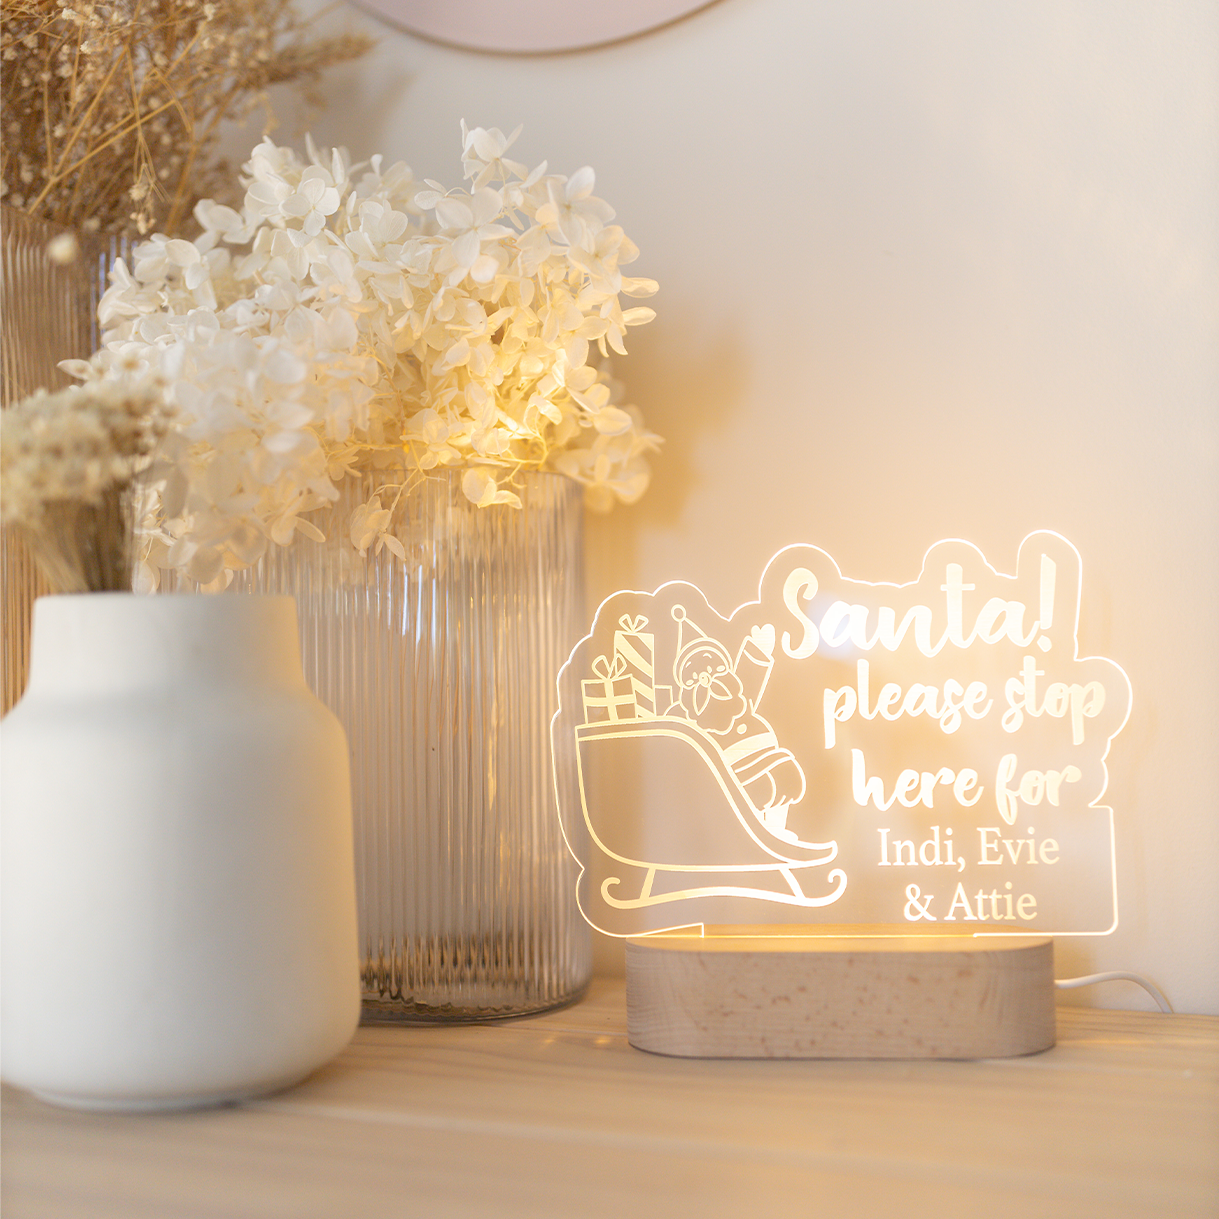 Acrylic Night Light - Santa Cut Out - Please Stop Here For...